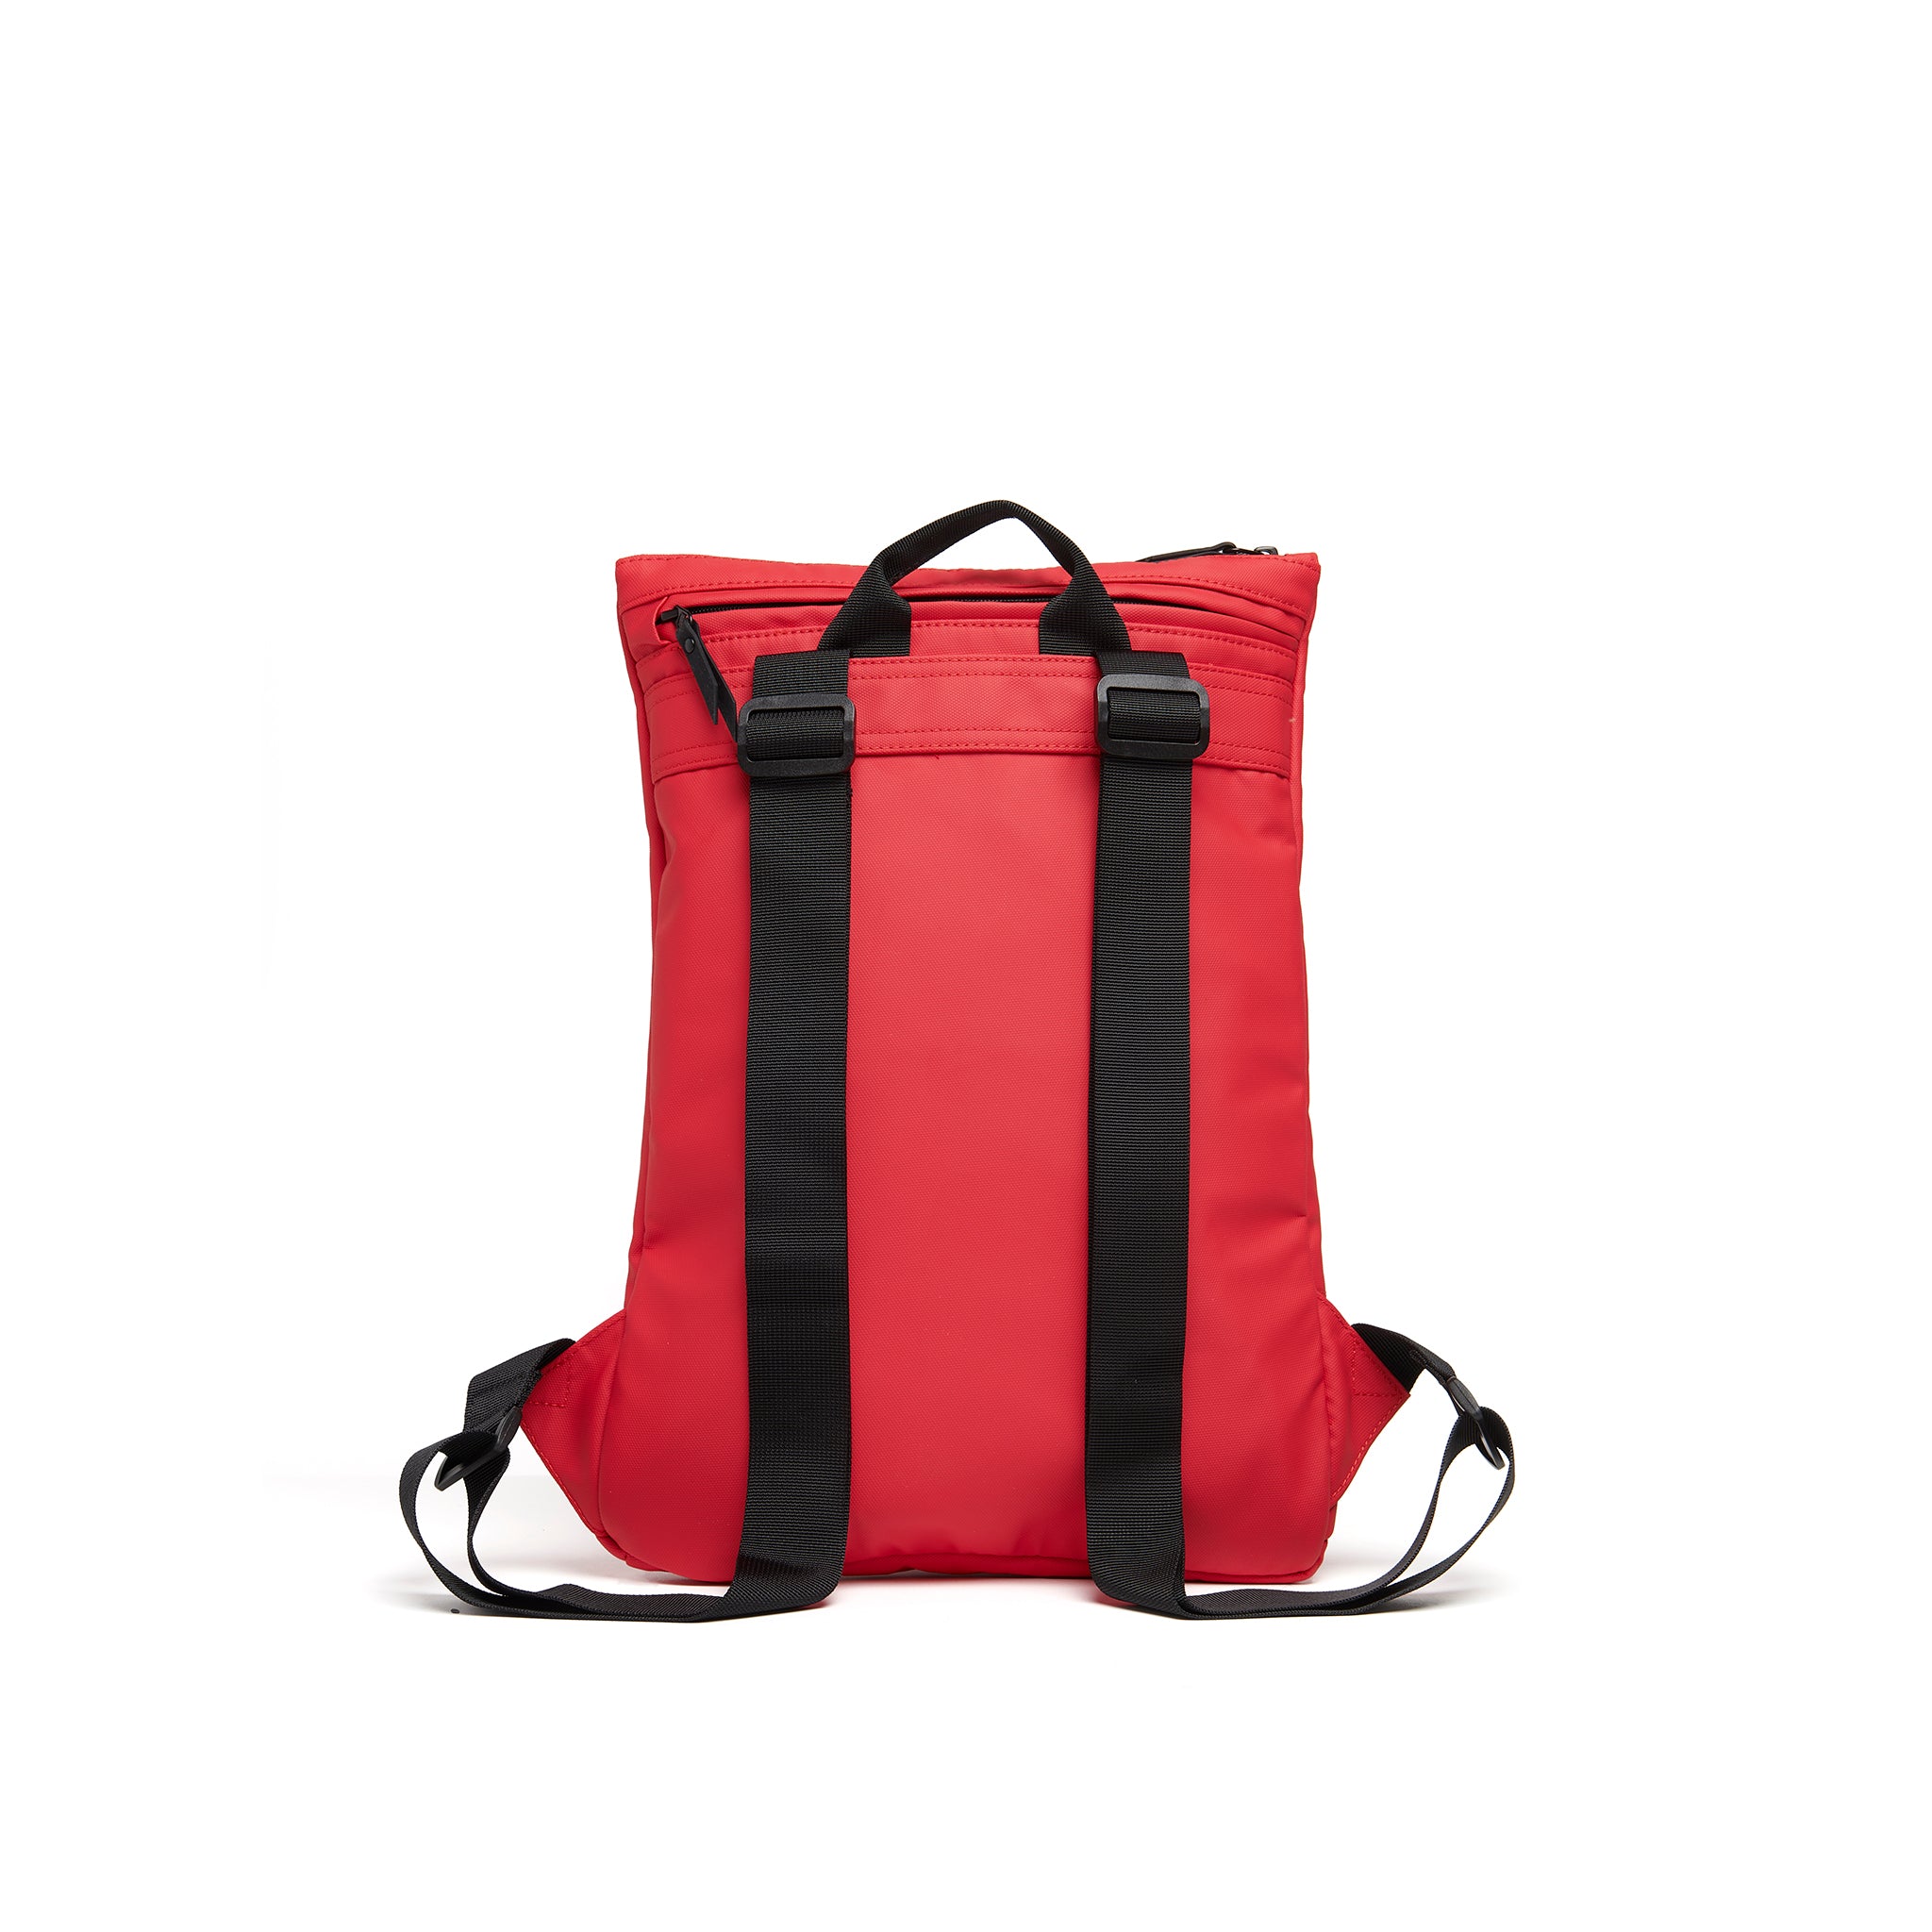 Mueslii light backpack,  made of PU coated waterproof nylon, with a laptop compartment, color red, back view.